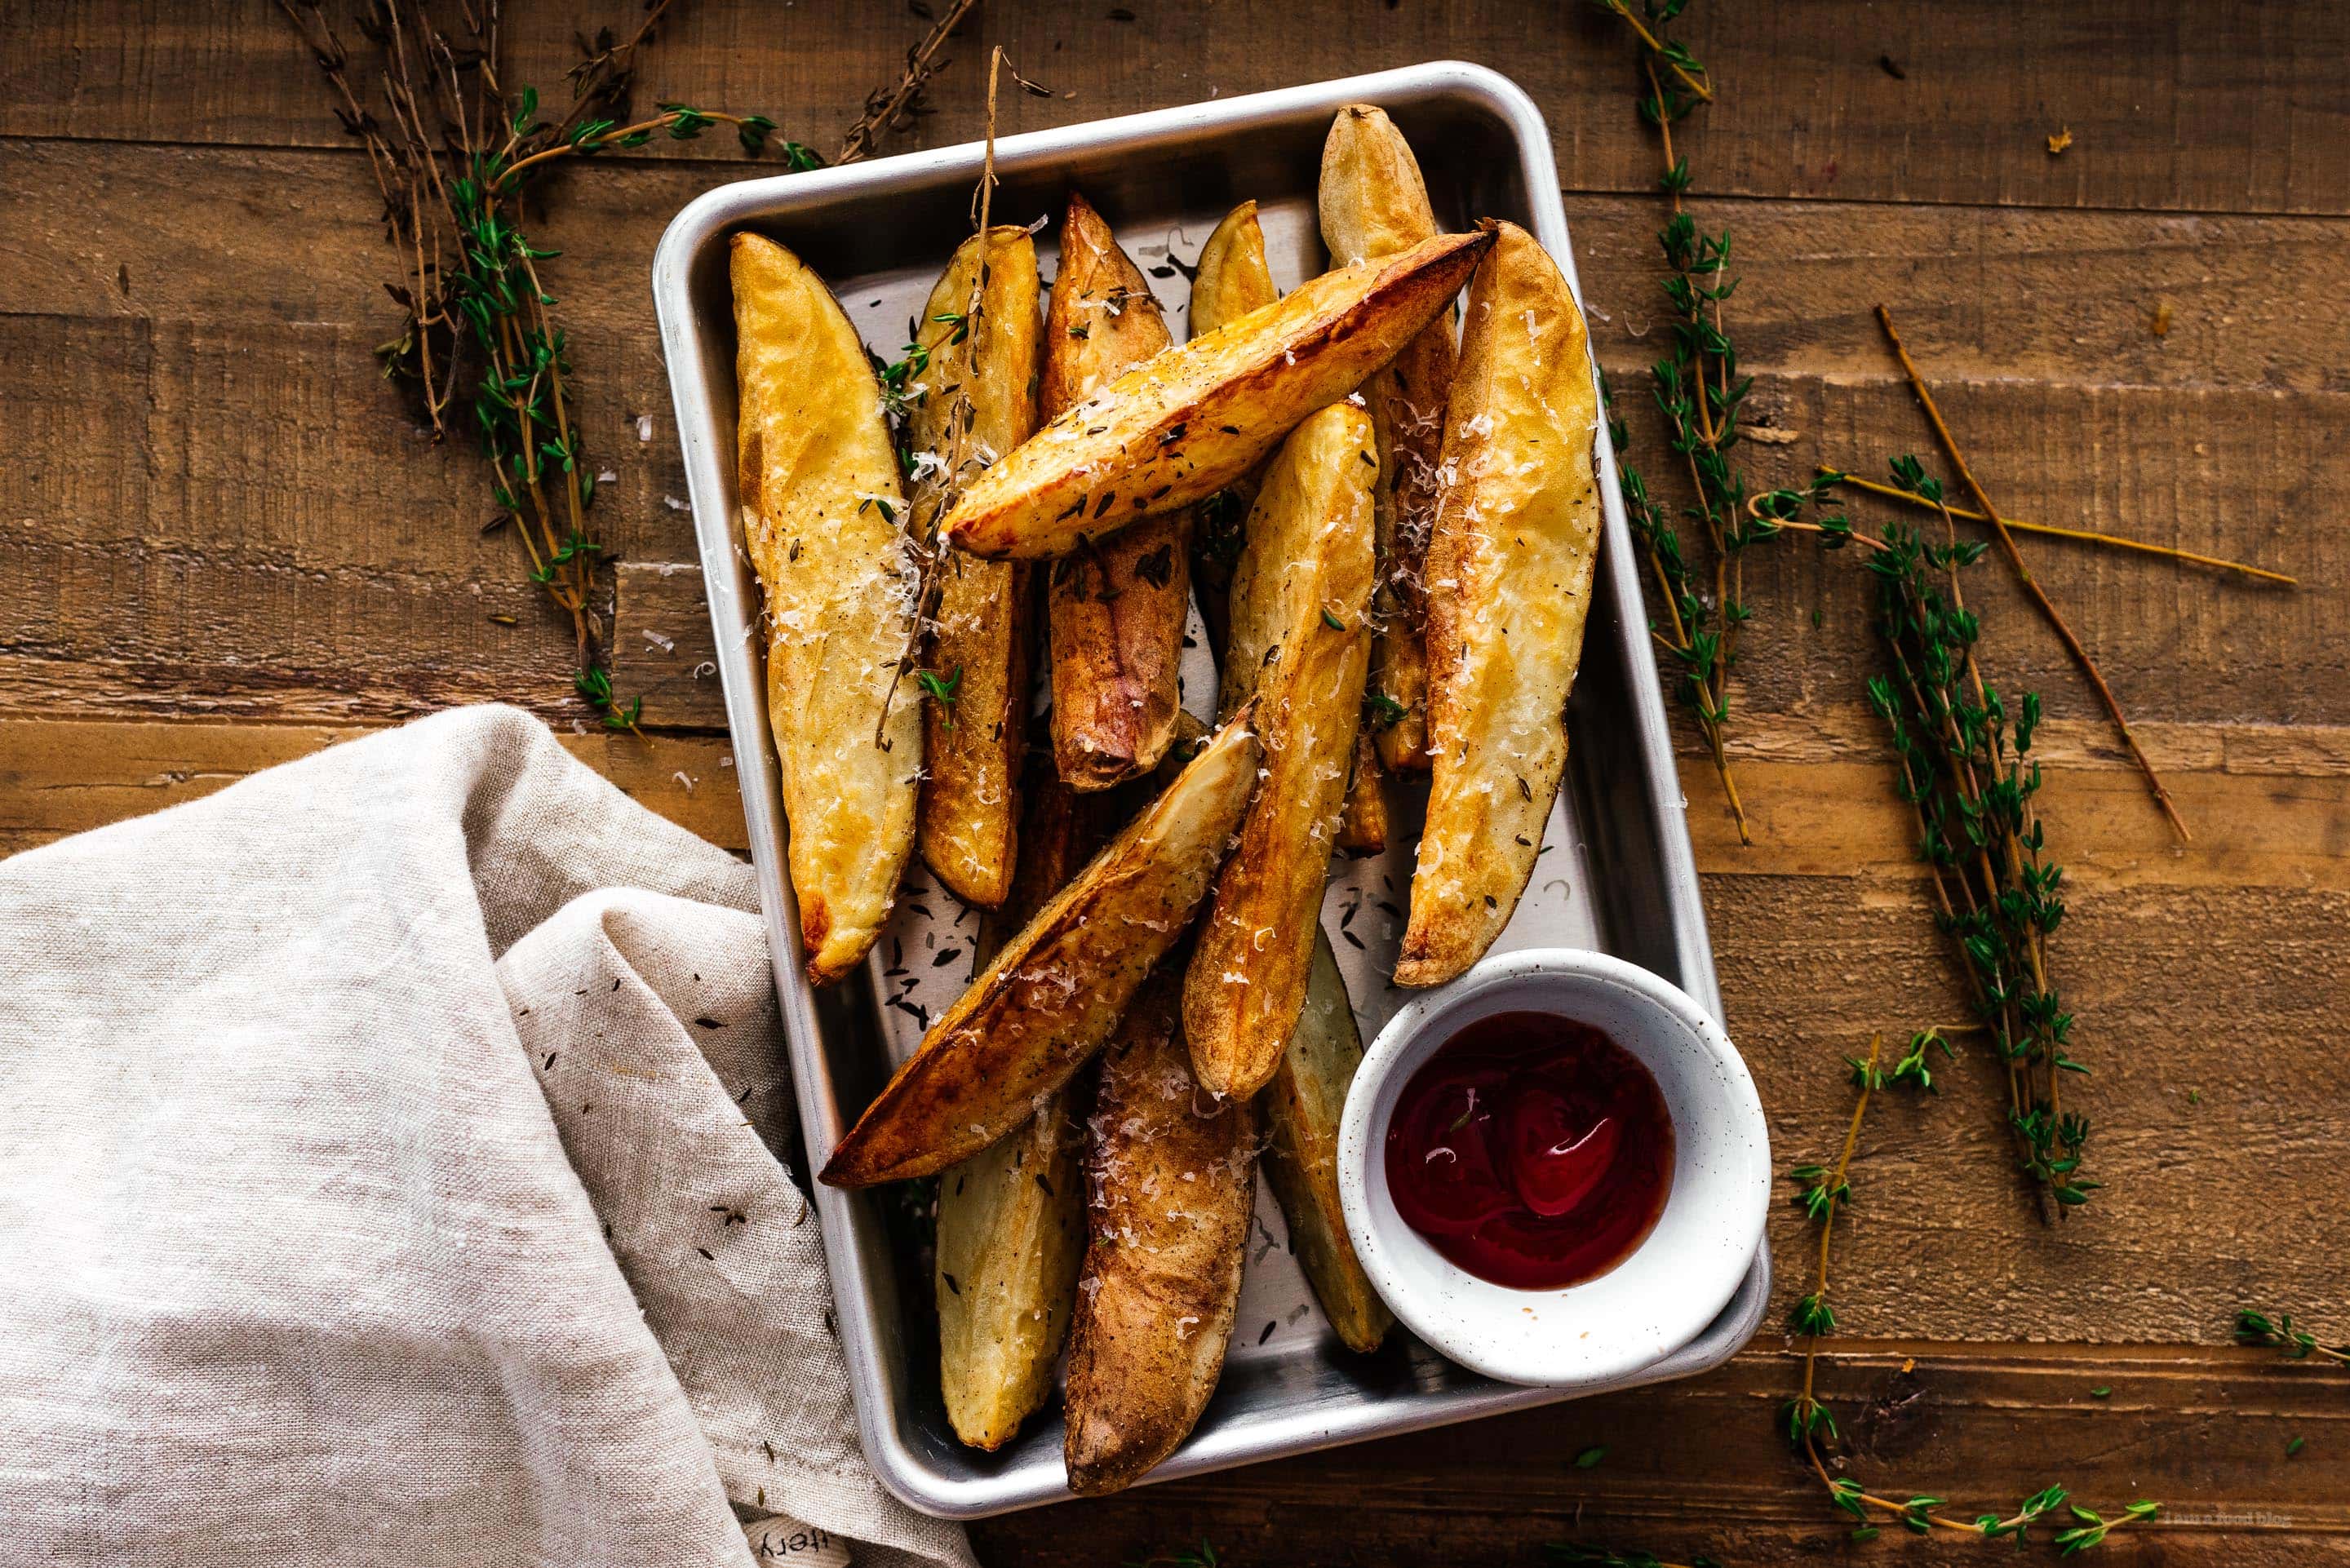 Crispy Air Fryer Parmesan and Thyme Roasted Wedge Fries | www.iamafoodblog.com